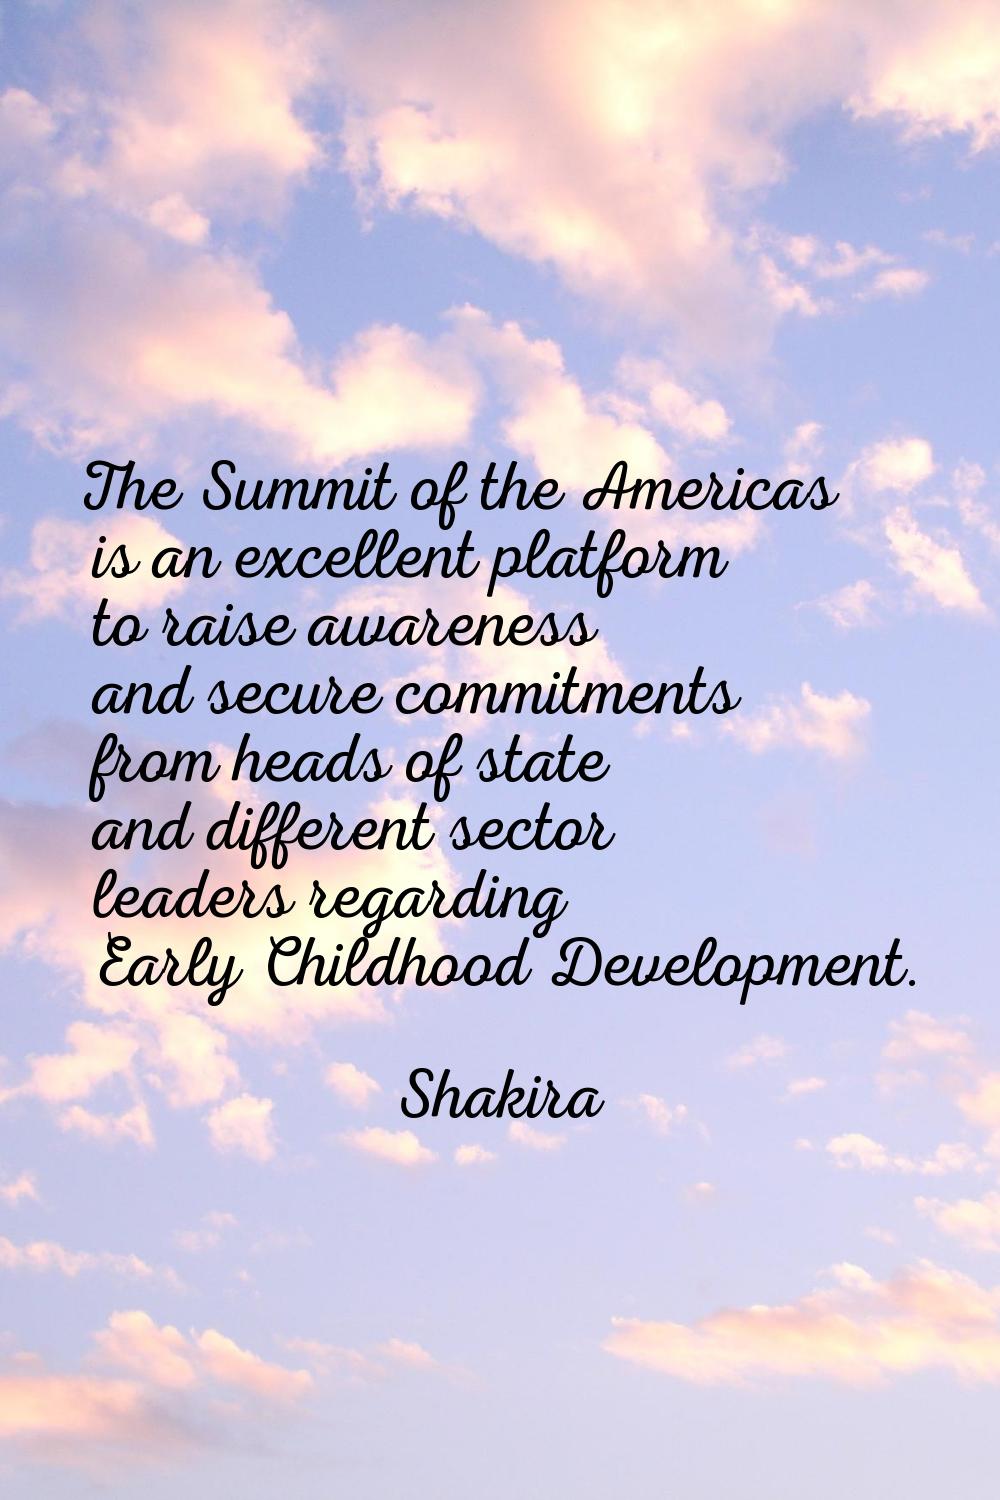 The Summit of the Americas is an excellent platform to raise awareness and secure commitments from 